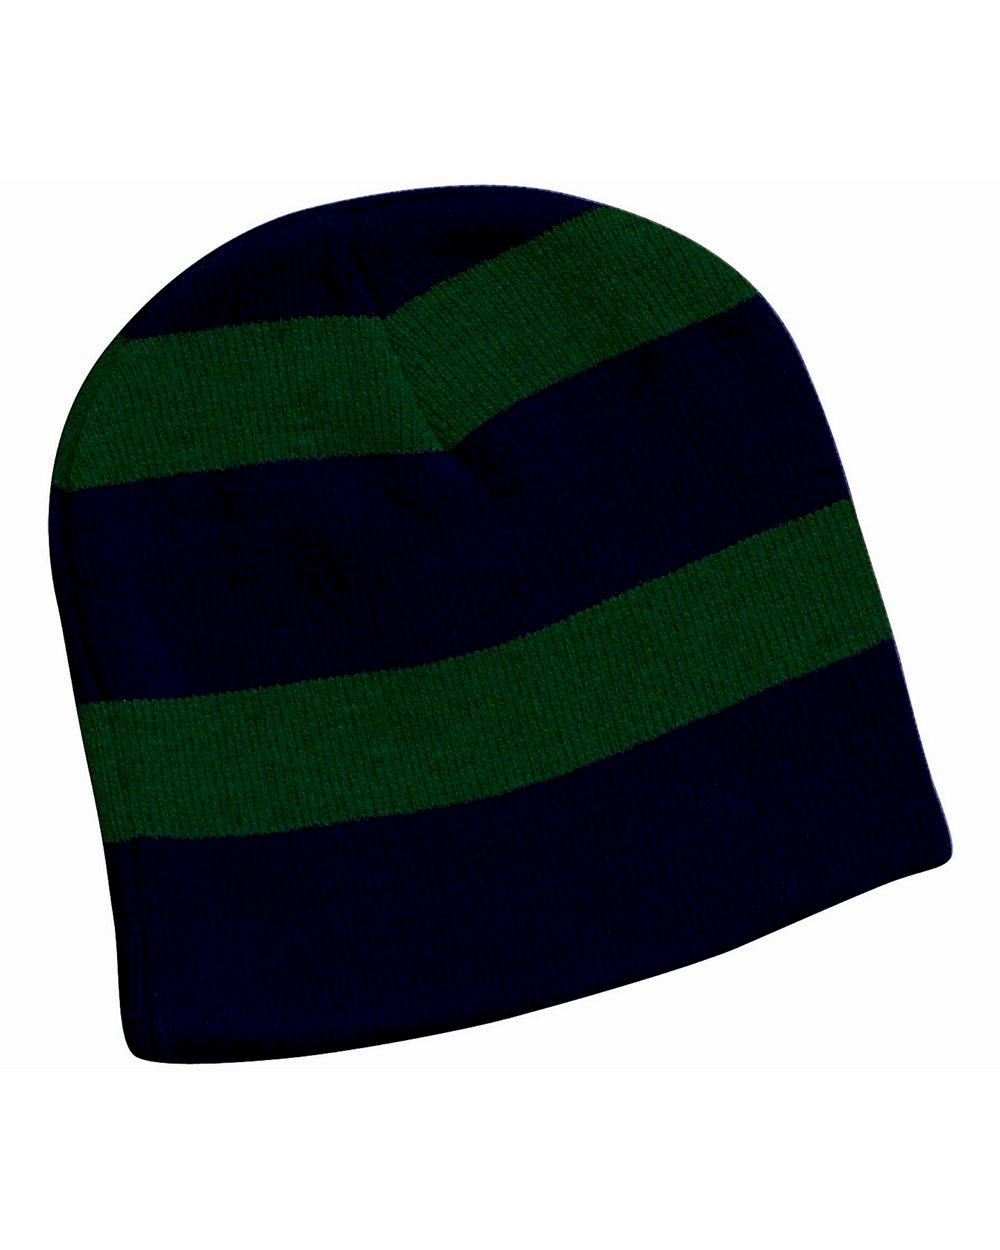 Rugby Striped Knit Beanie Embroidery Blanks - Navy/Forest